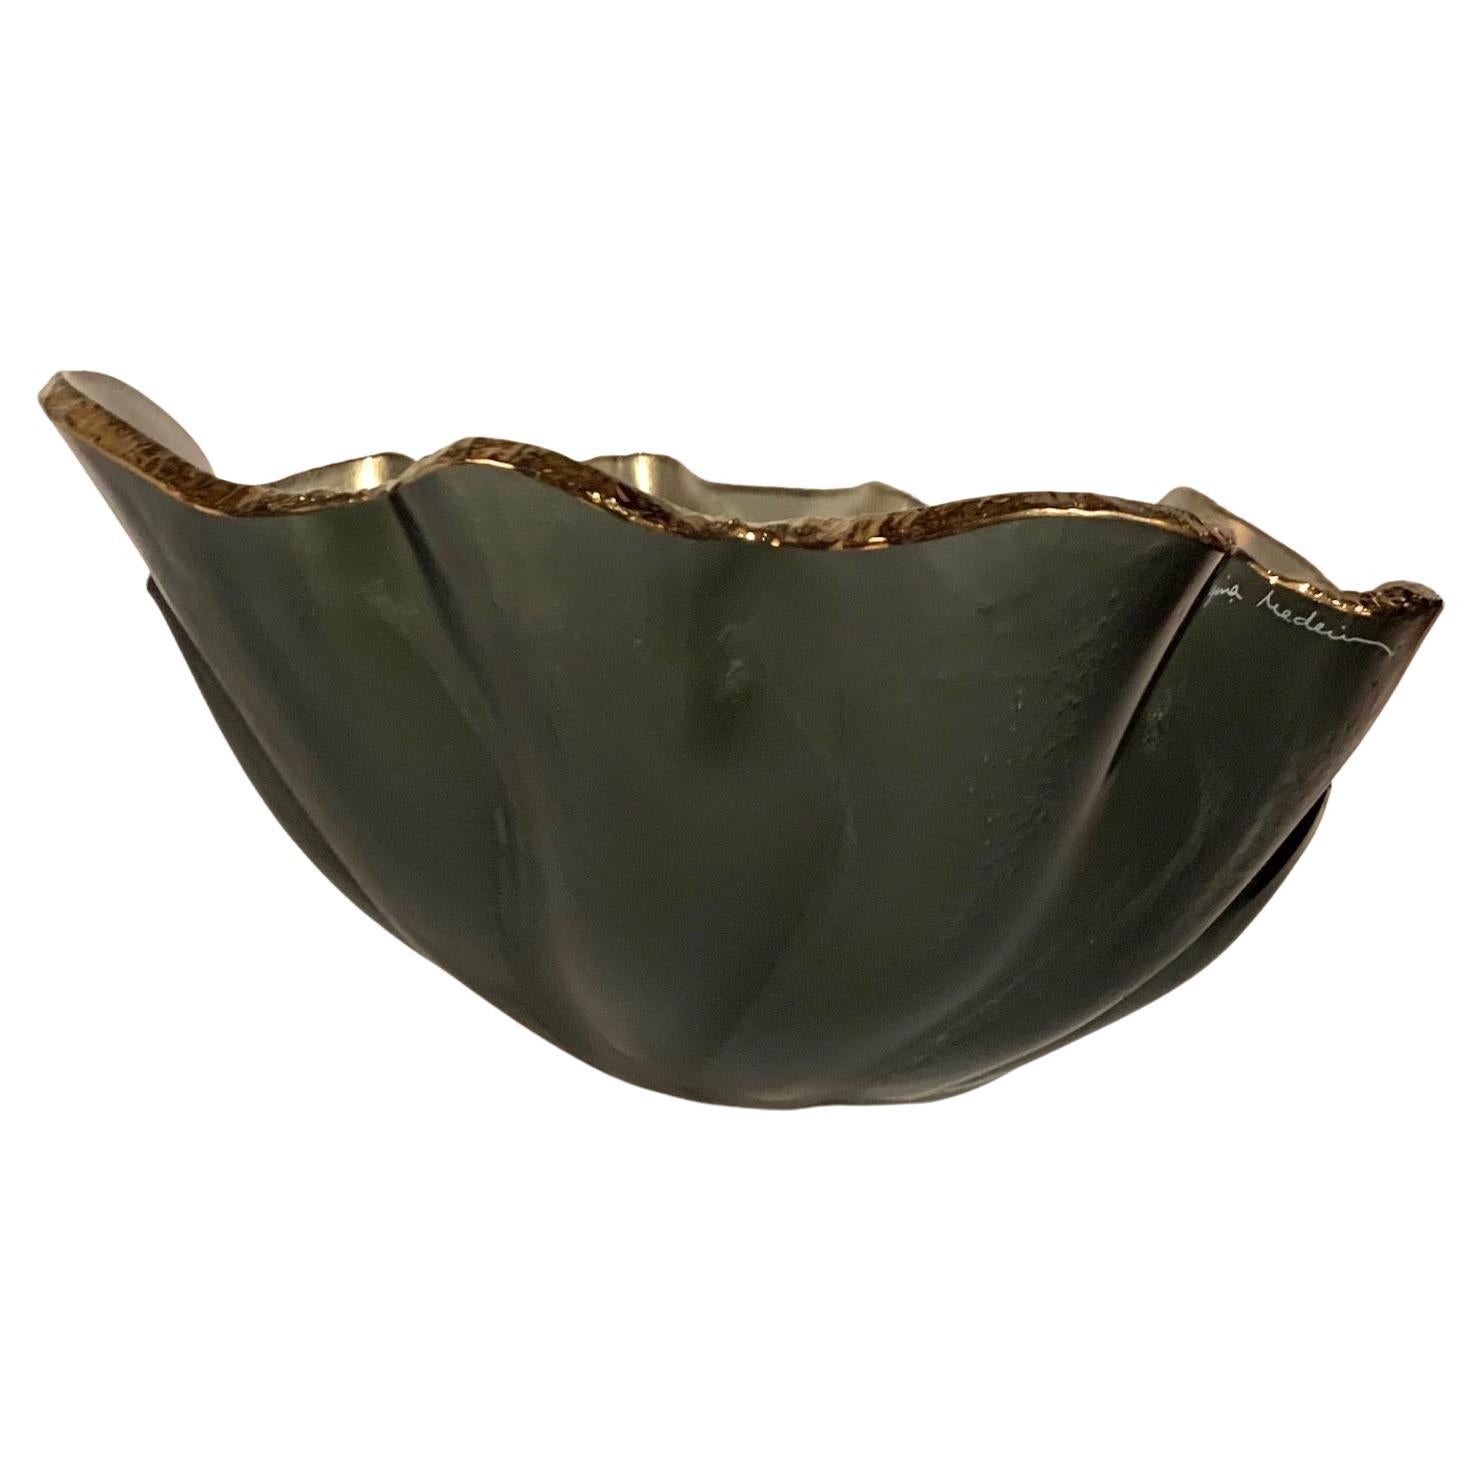 Contemporary Brazilian free form shaped glass bowl.
Metallic silver interior with decorative chiseled rough edges gold in color.
One of several Brazilian designed glass objects.